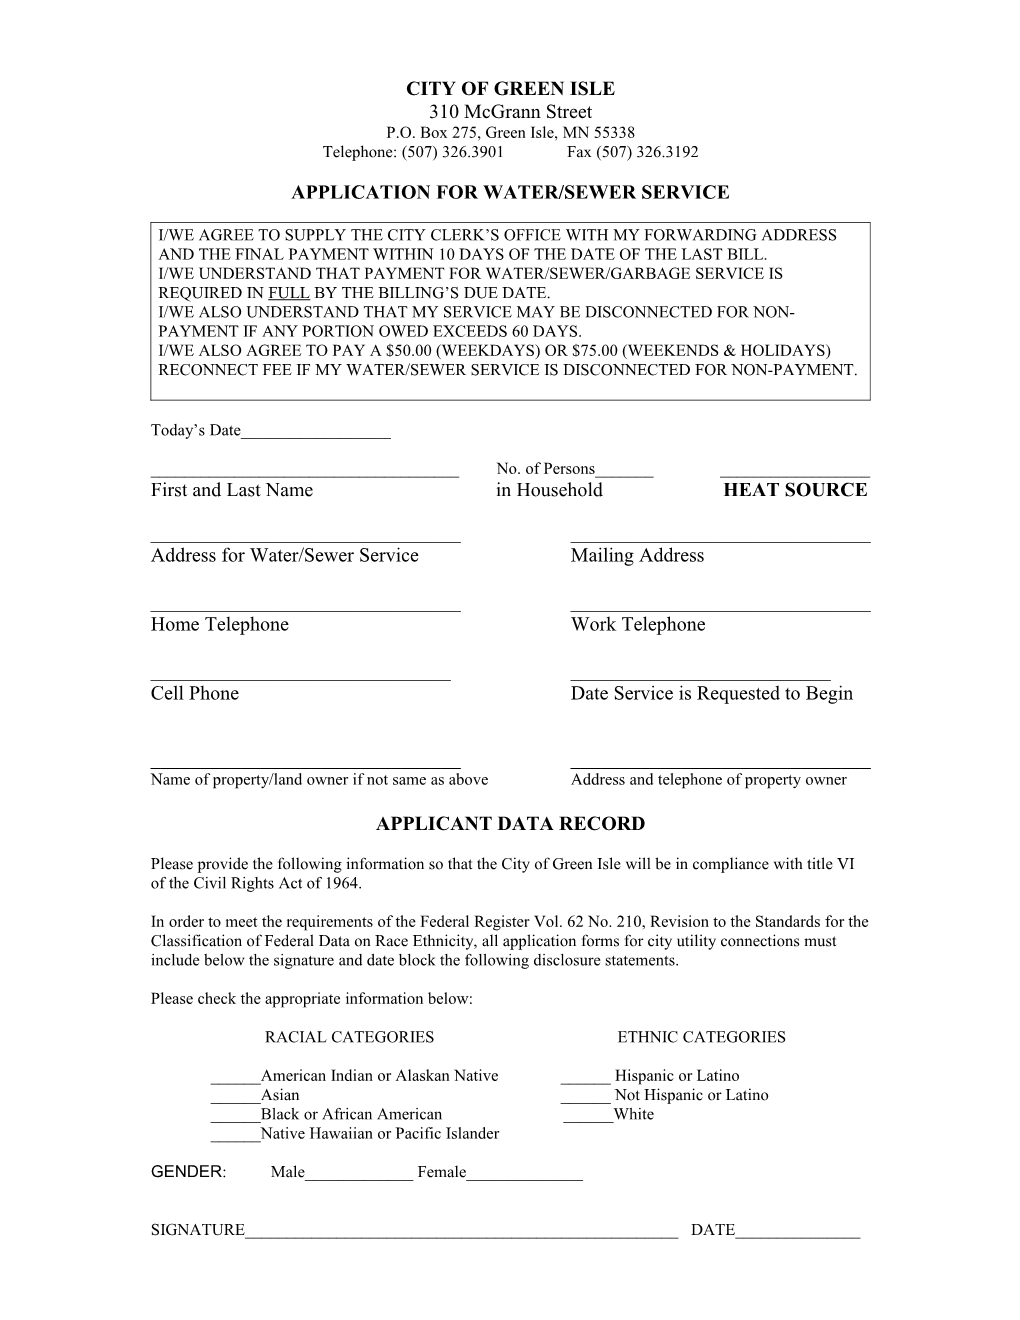 Application for Water/Sewer Service